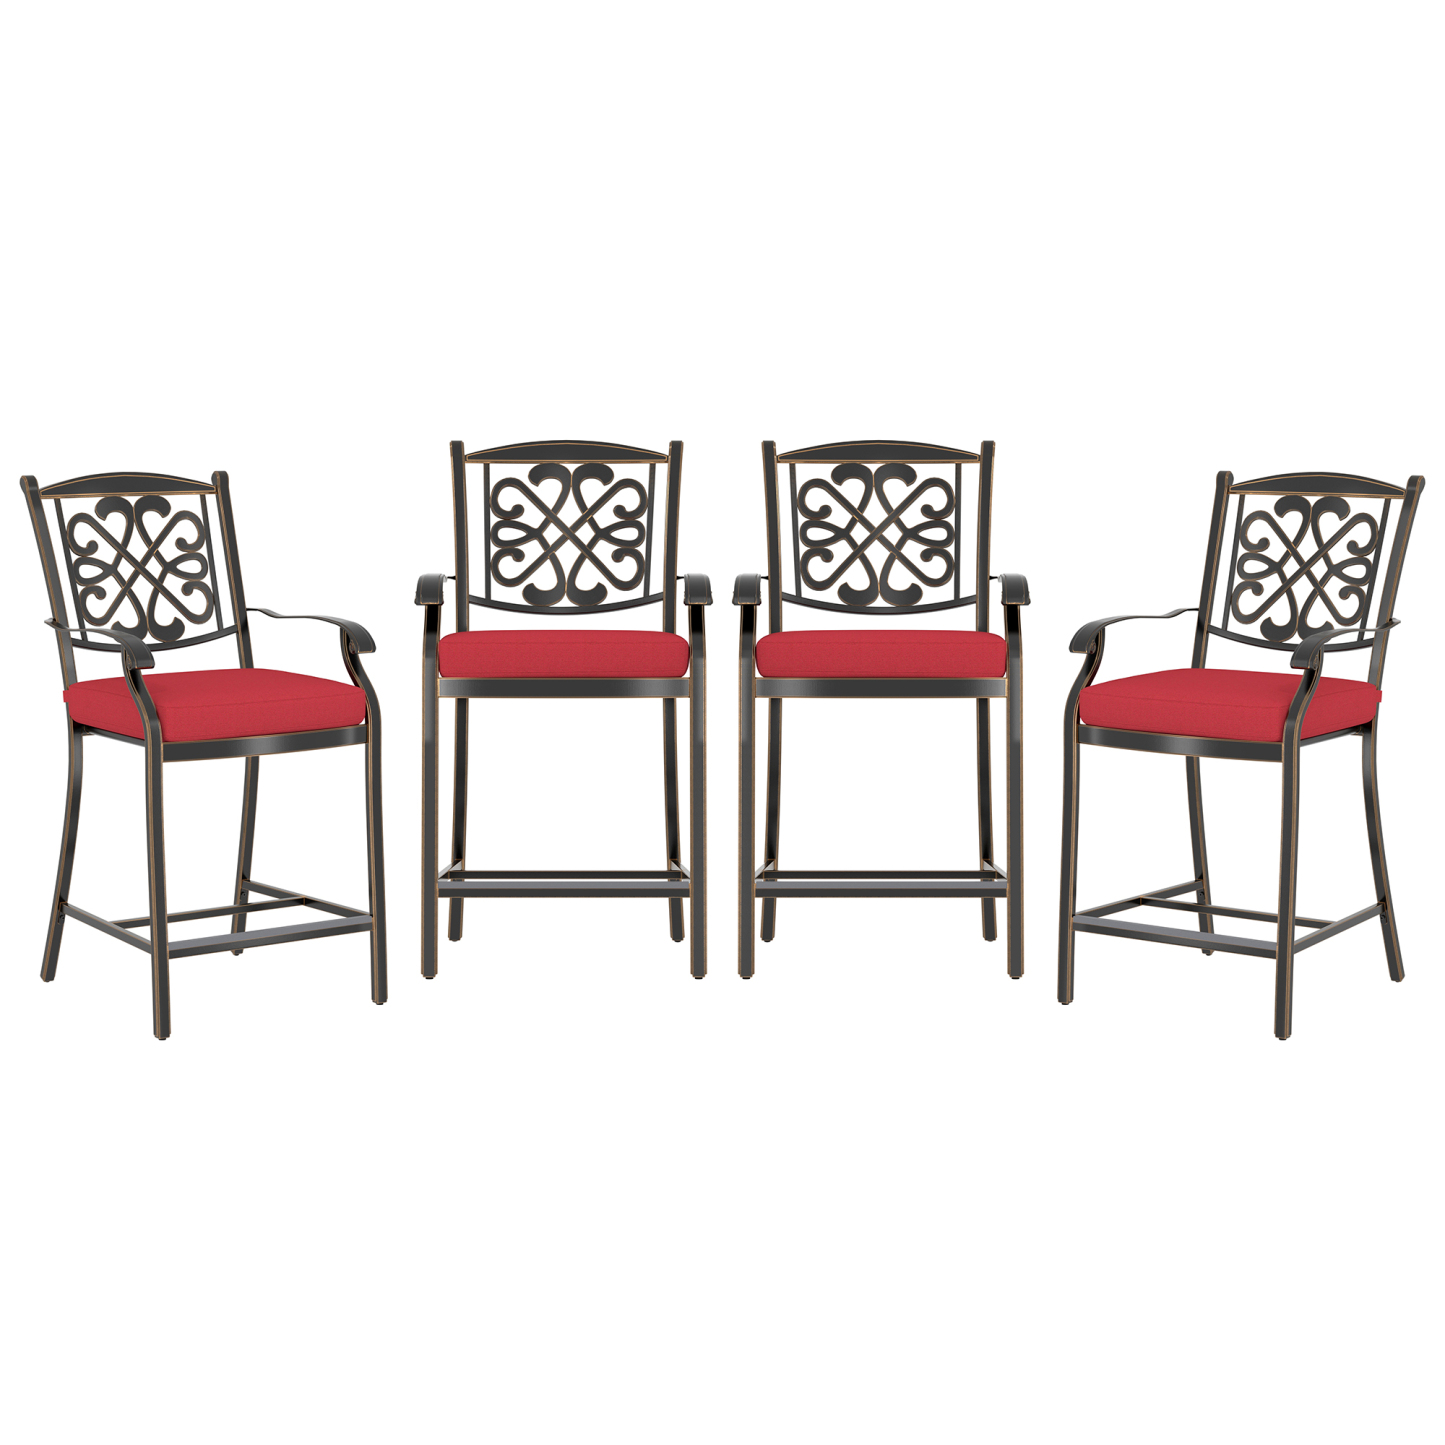 Mondawe 5Pcs Cast Aluminum Dining Bar Set with Round Table and Diamond-Mesh Curved Backrest Dining Chairs in Red/Beige-Mondawe